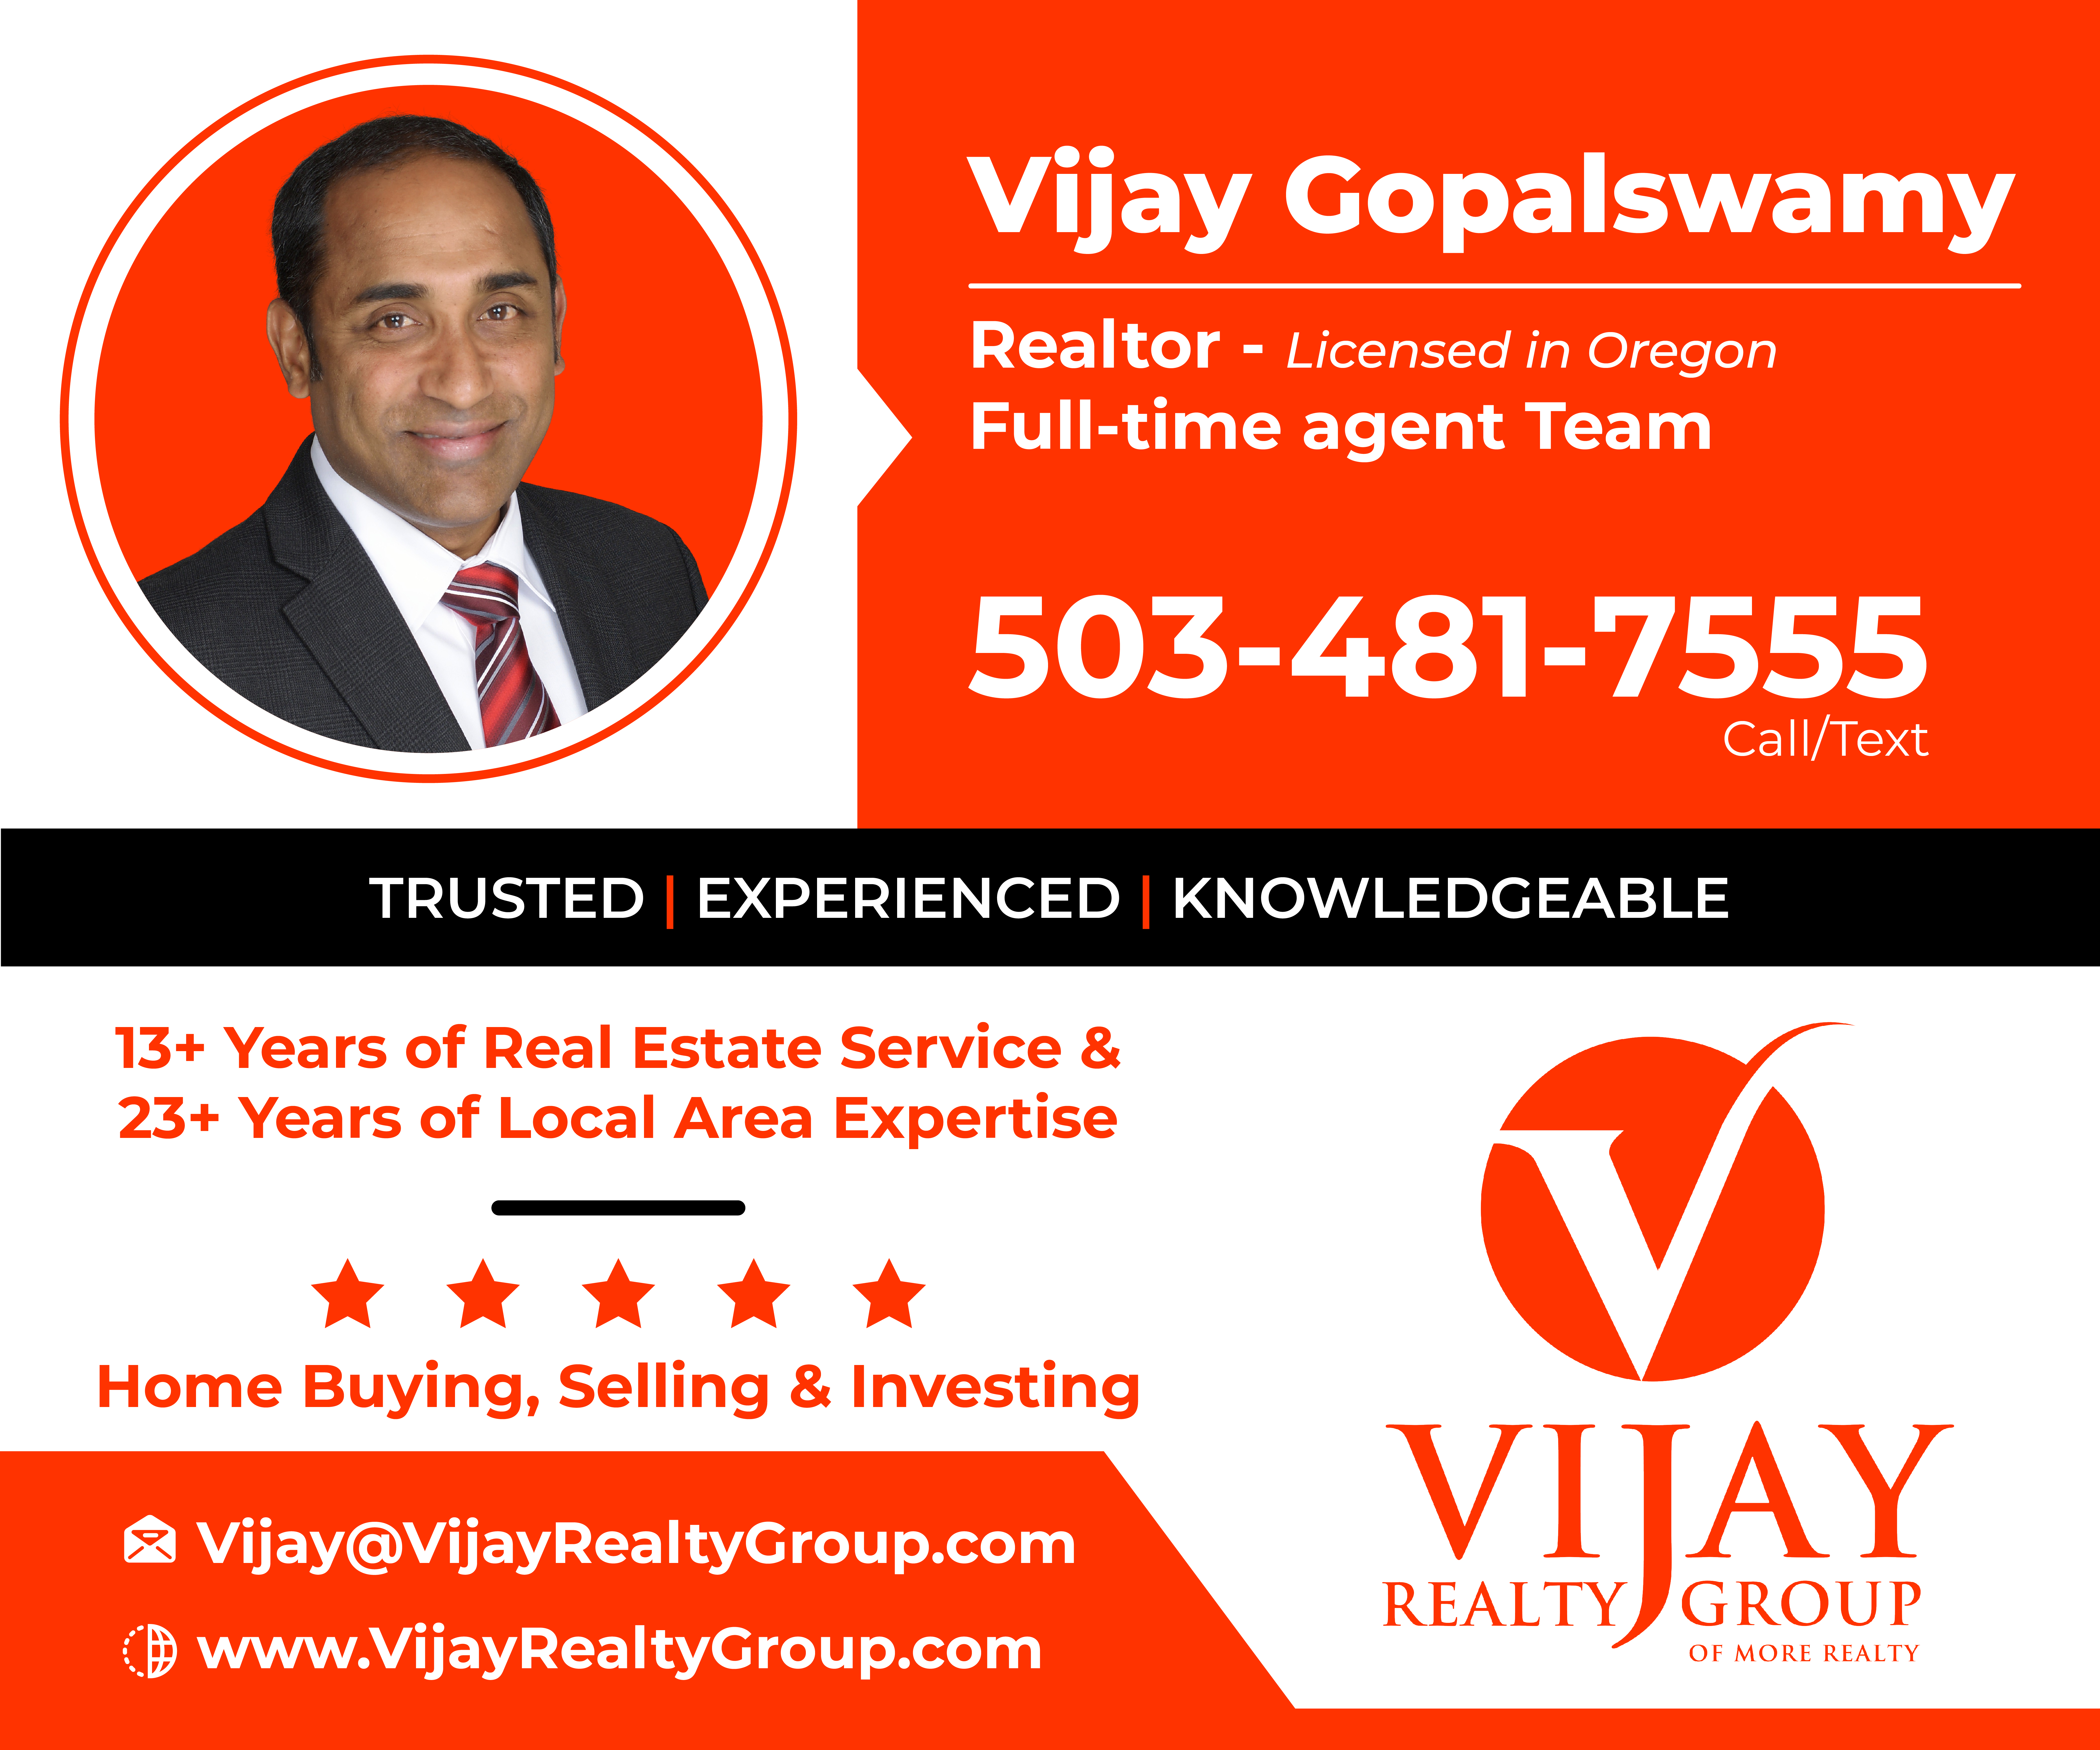 Vijay Realty Group - Indian Real Estate Brokers, Agents